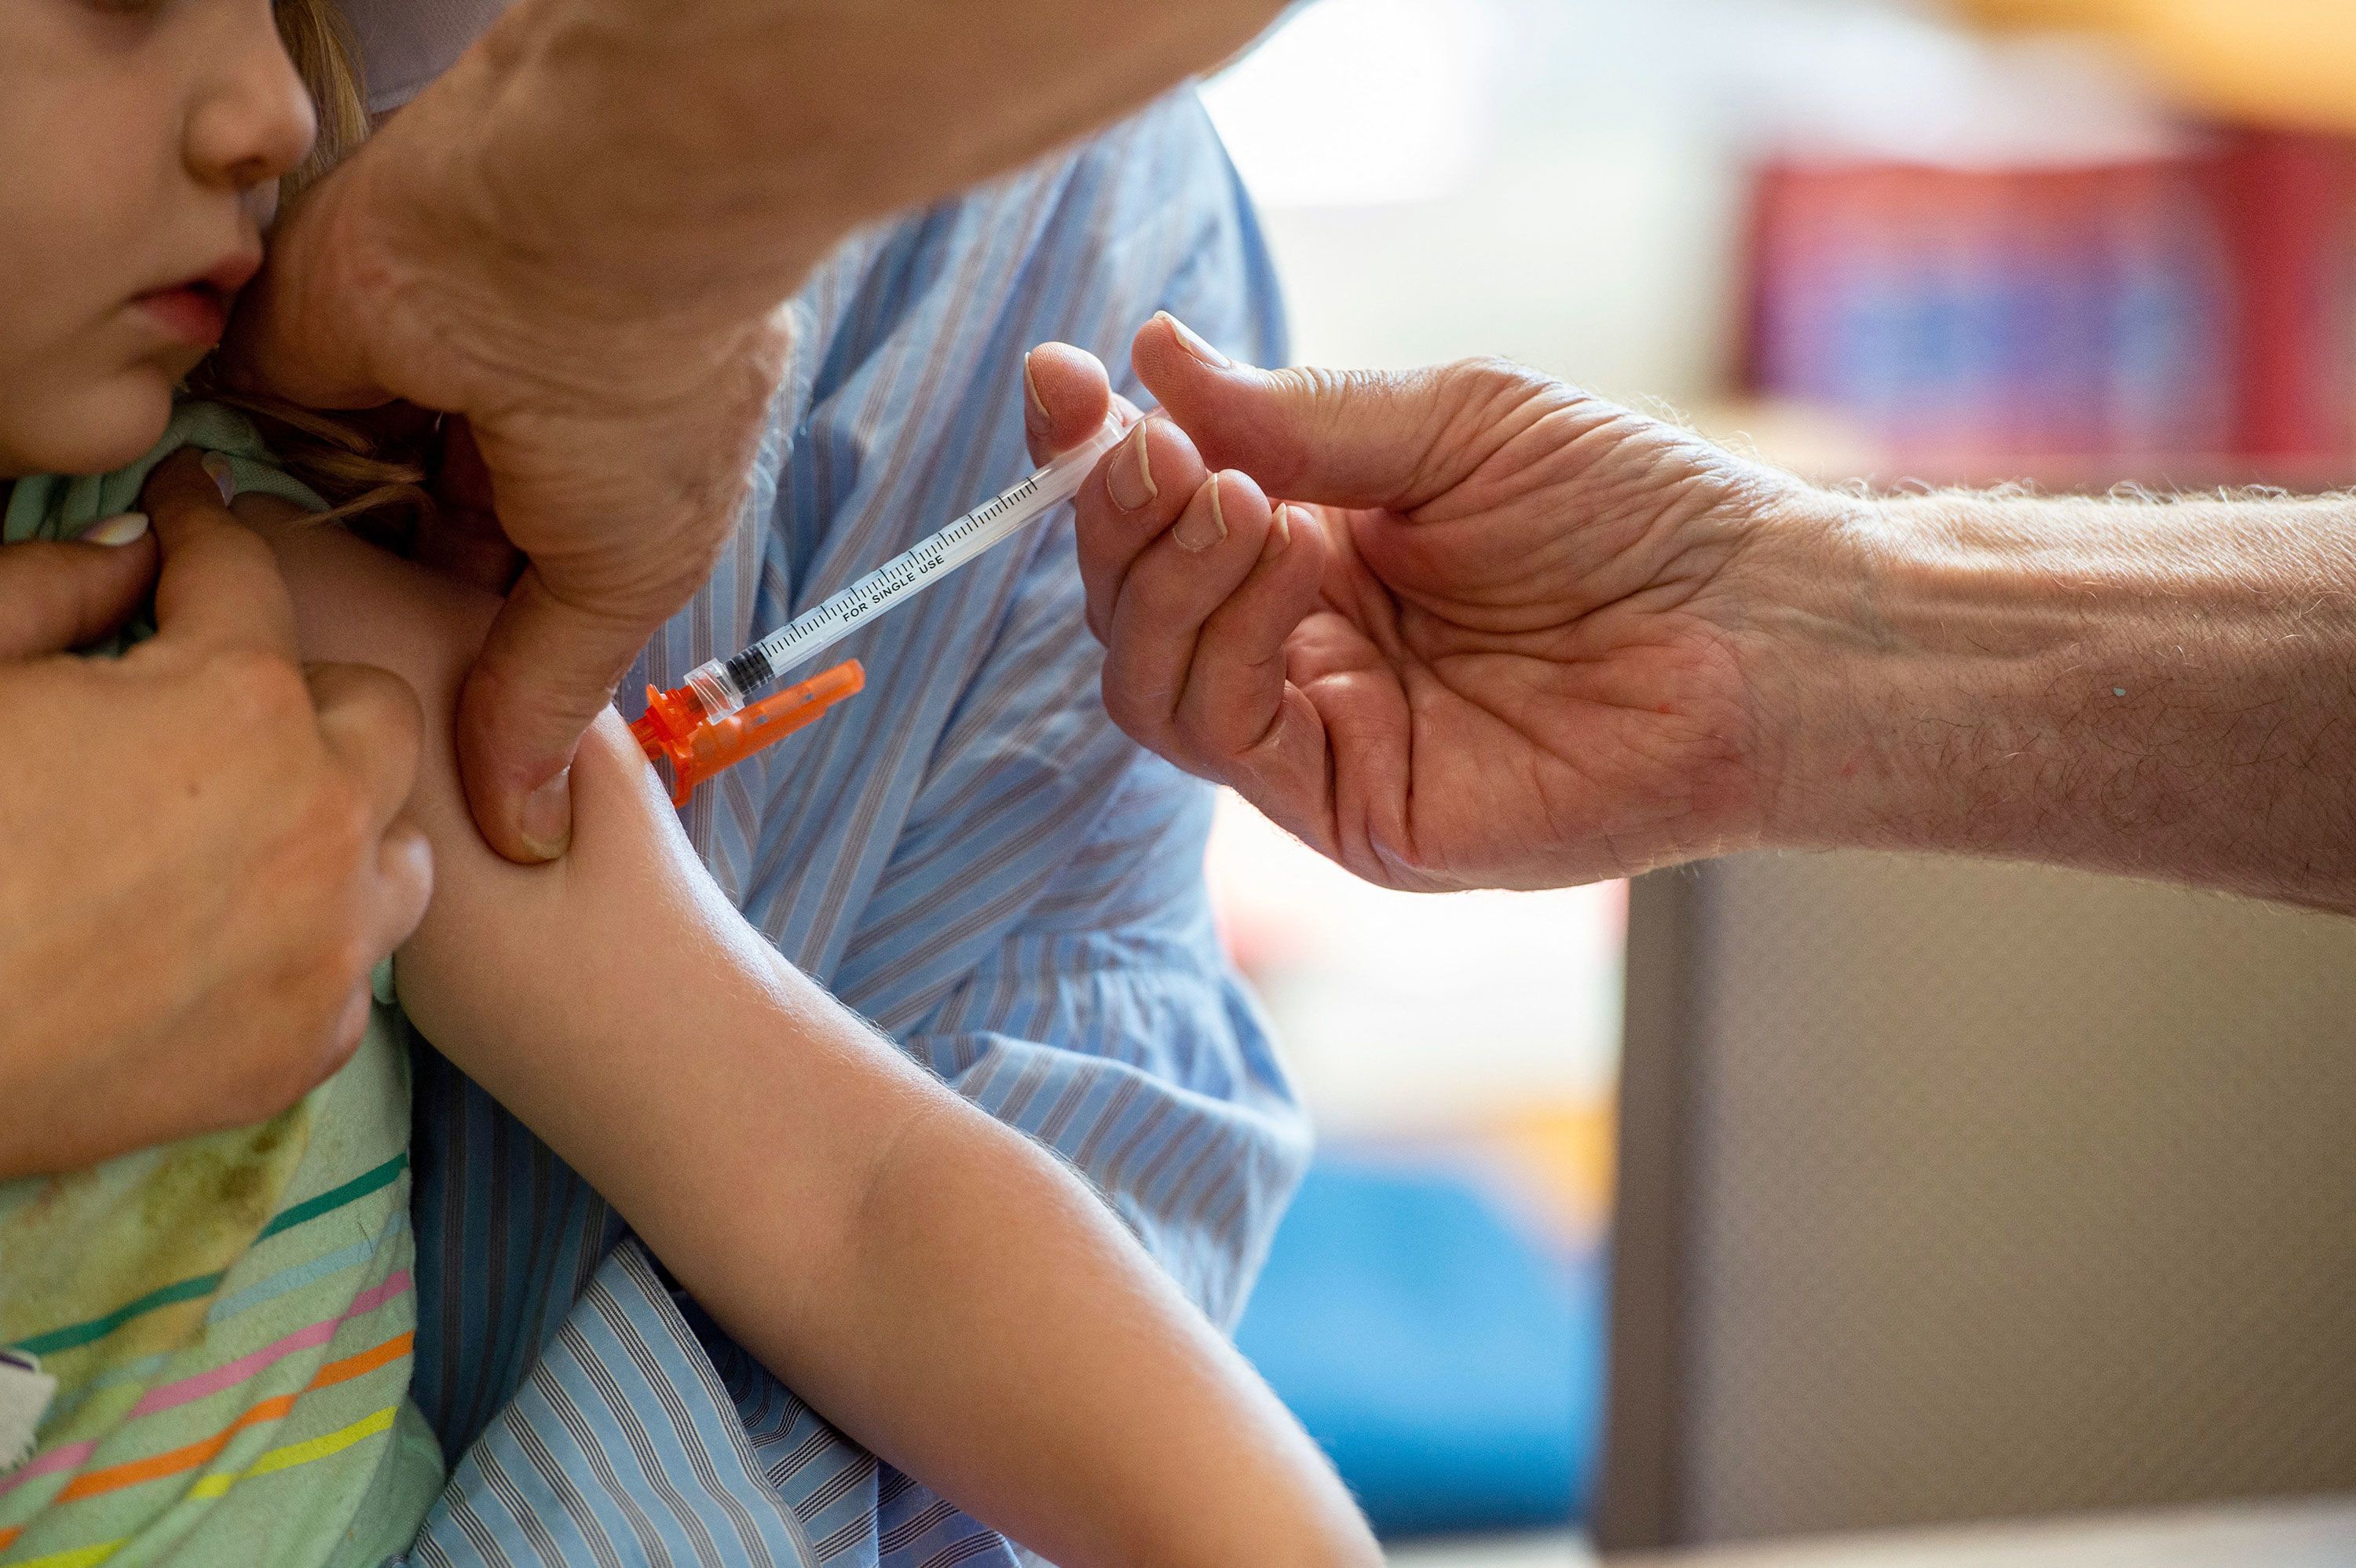 Back-To-School Student Immunization Clinics Scheduled for Aug. 3